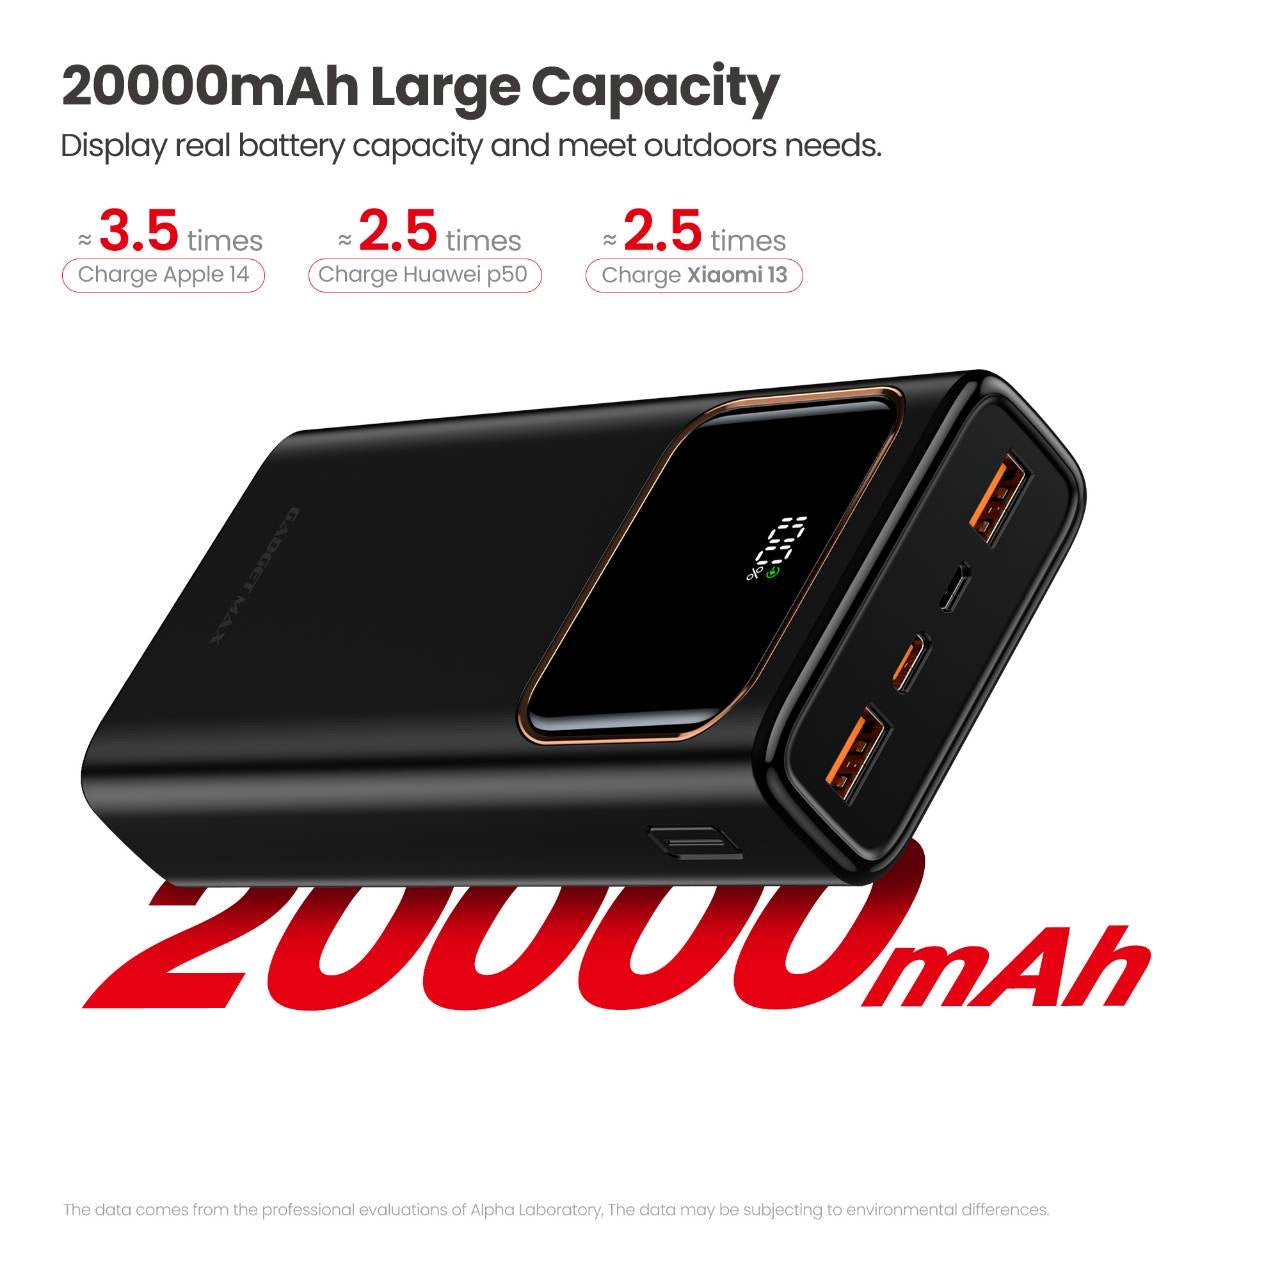 GADGET MAX 20000MAH 22.5W RAY PD POWER BANK (5V/3A)(OUTPUT-TYPE-C/A1/A2)(INPUT-MICRO/TYPE-C)